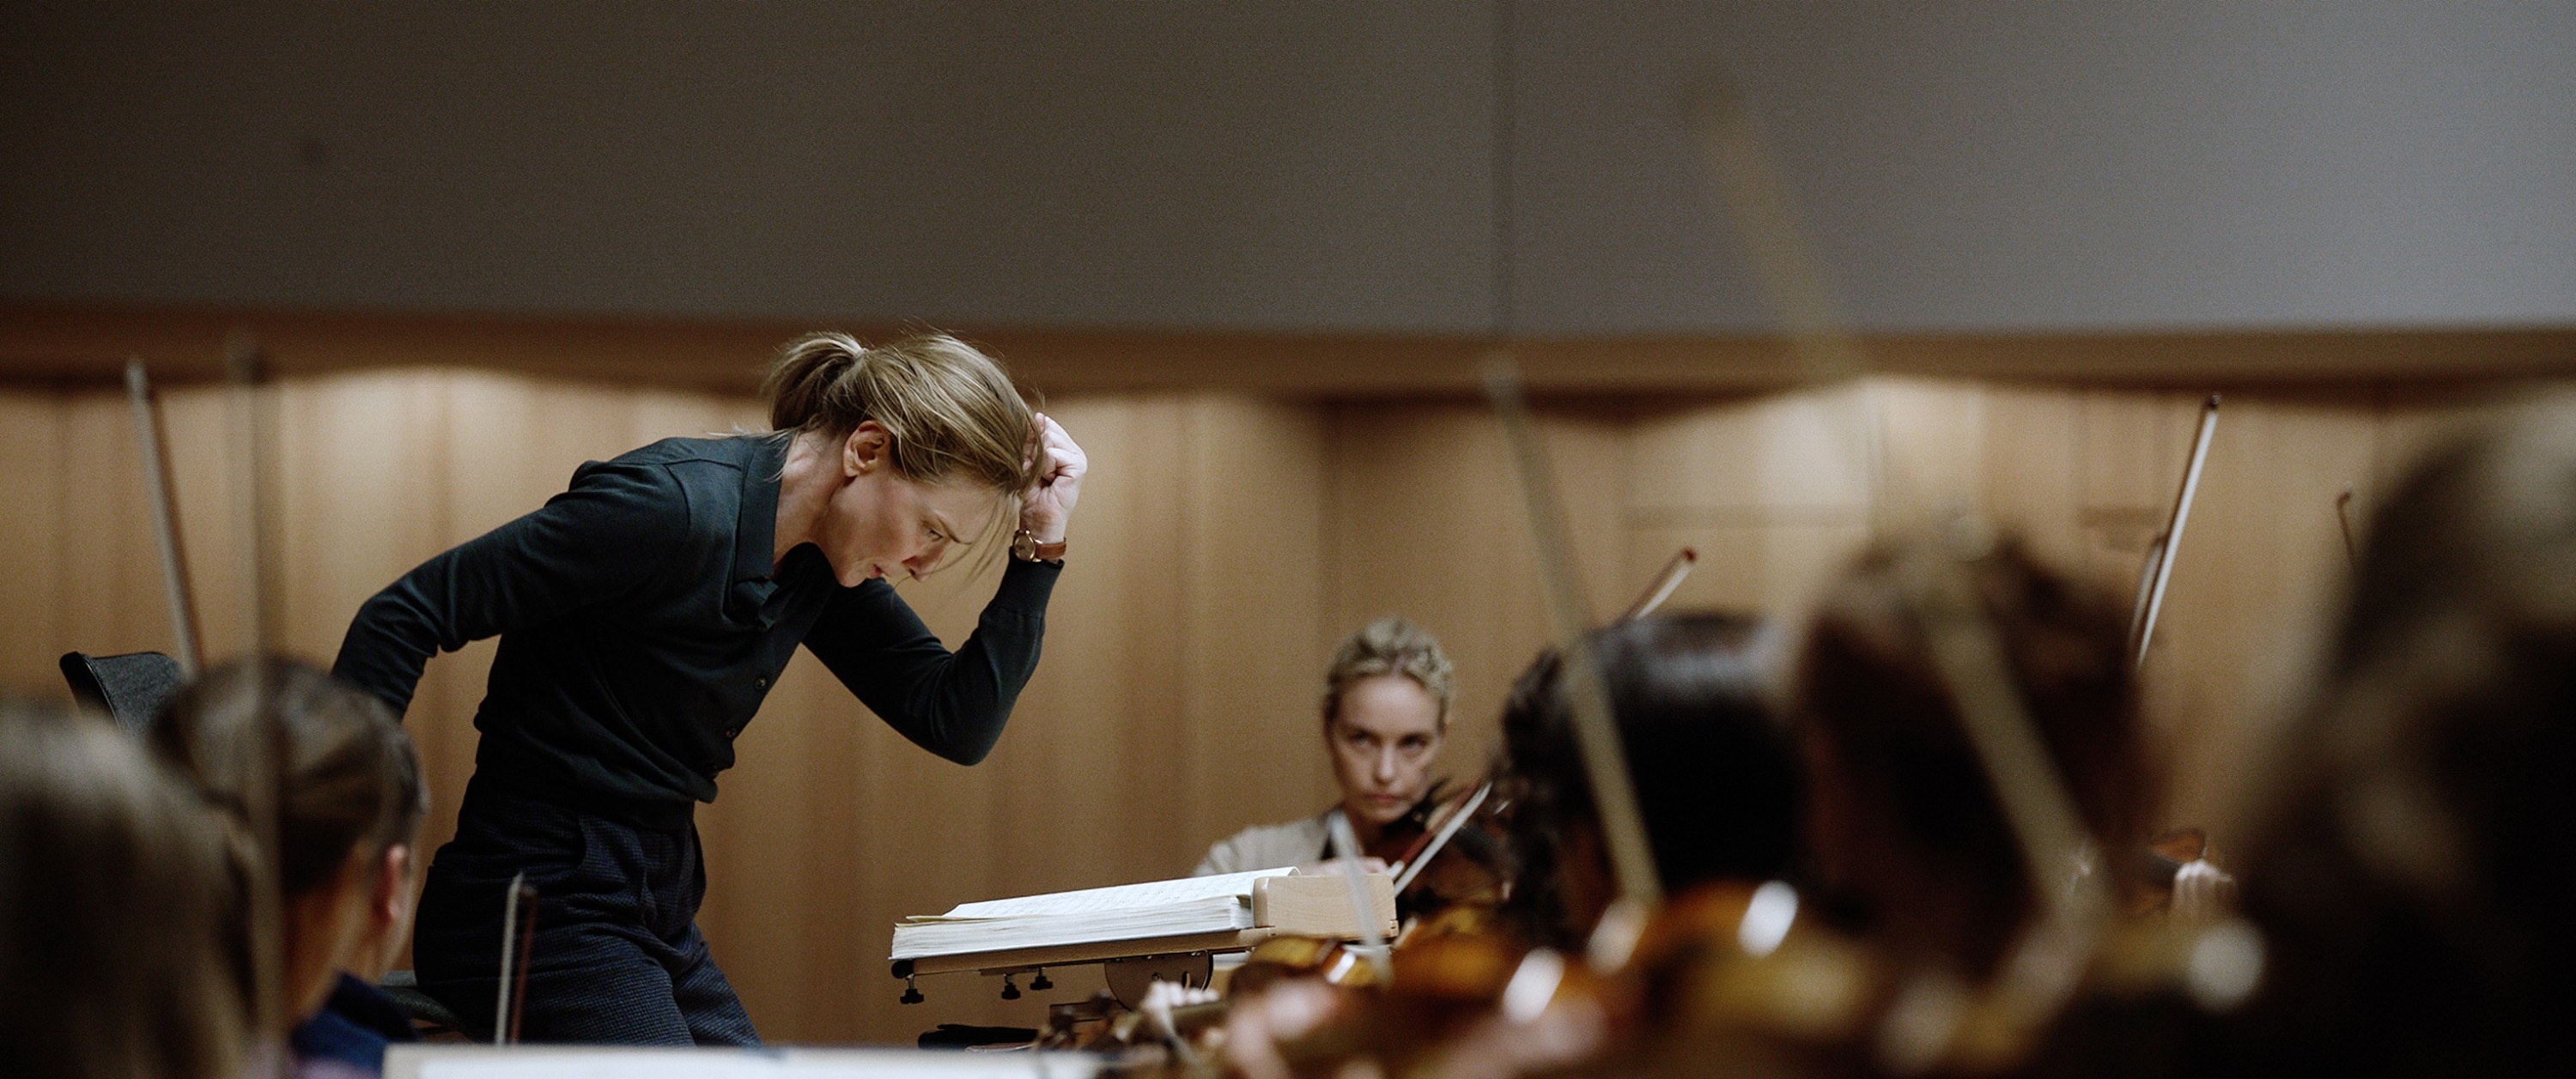 Lydia conducting with her orchestra, Sharon watching from the first violin seat